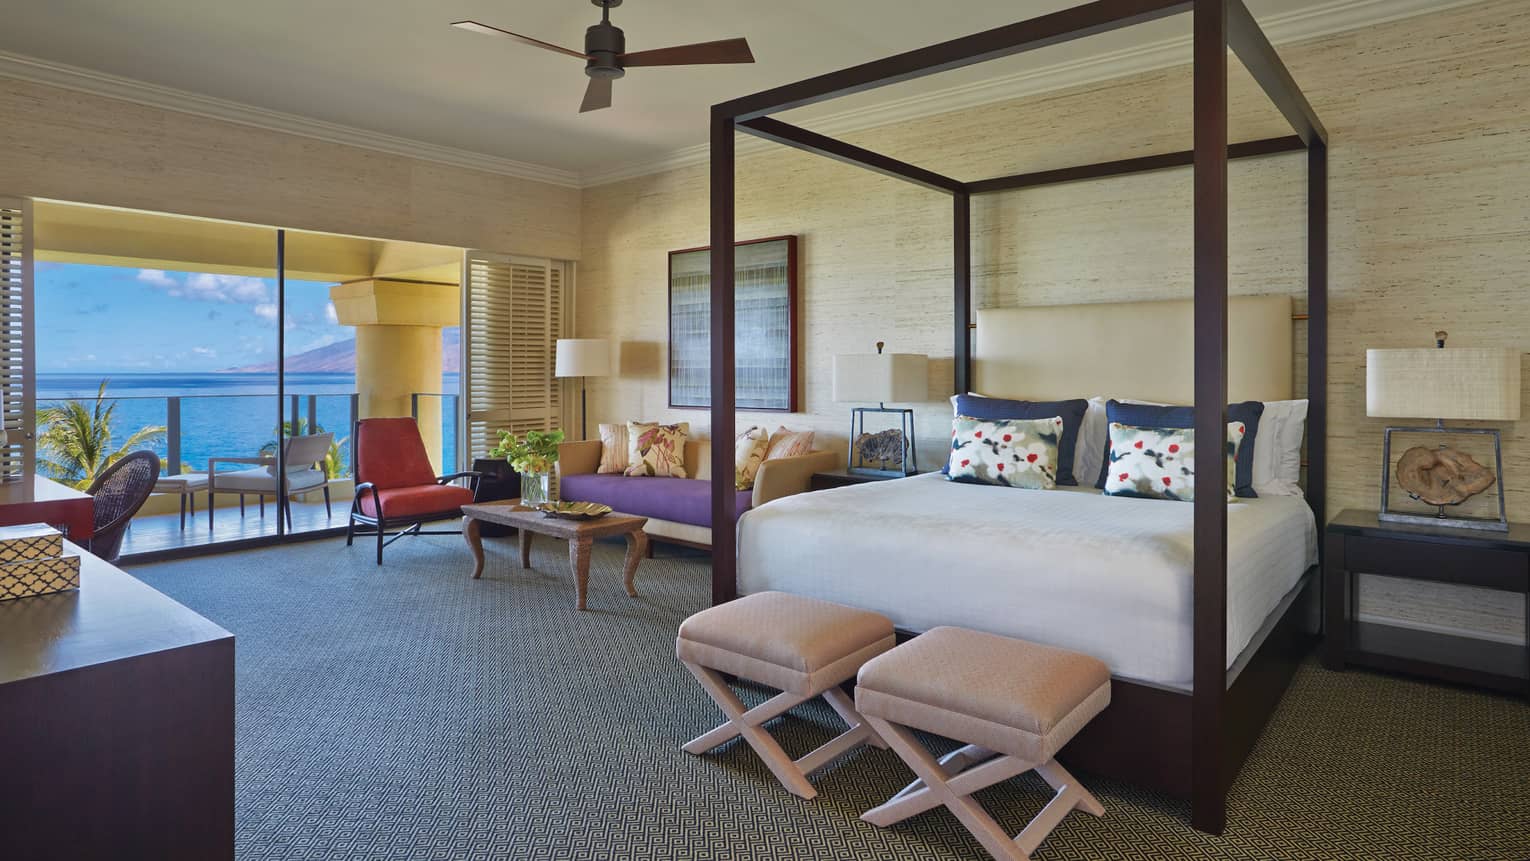 Maile Suite master bedroom with four poster bed and doors leading out to private terrace